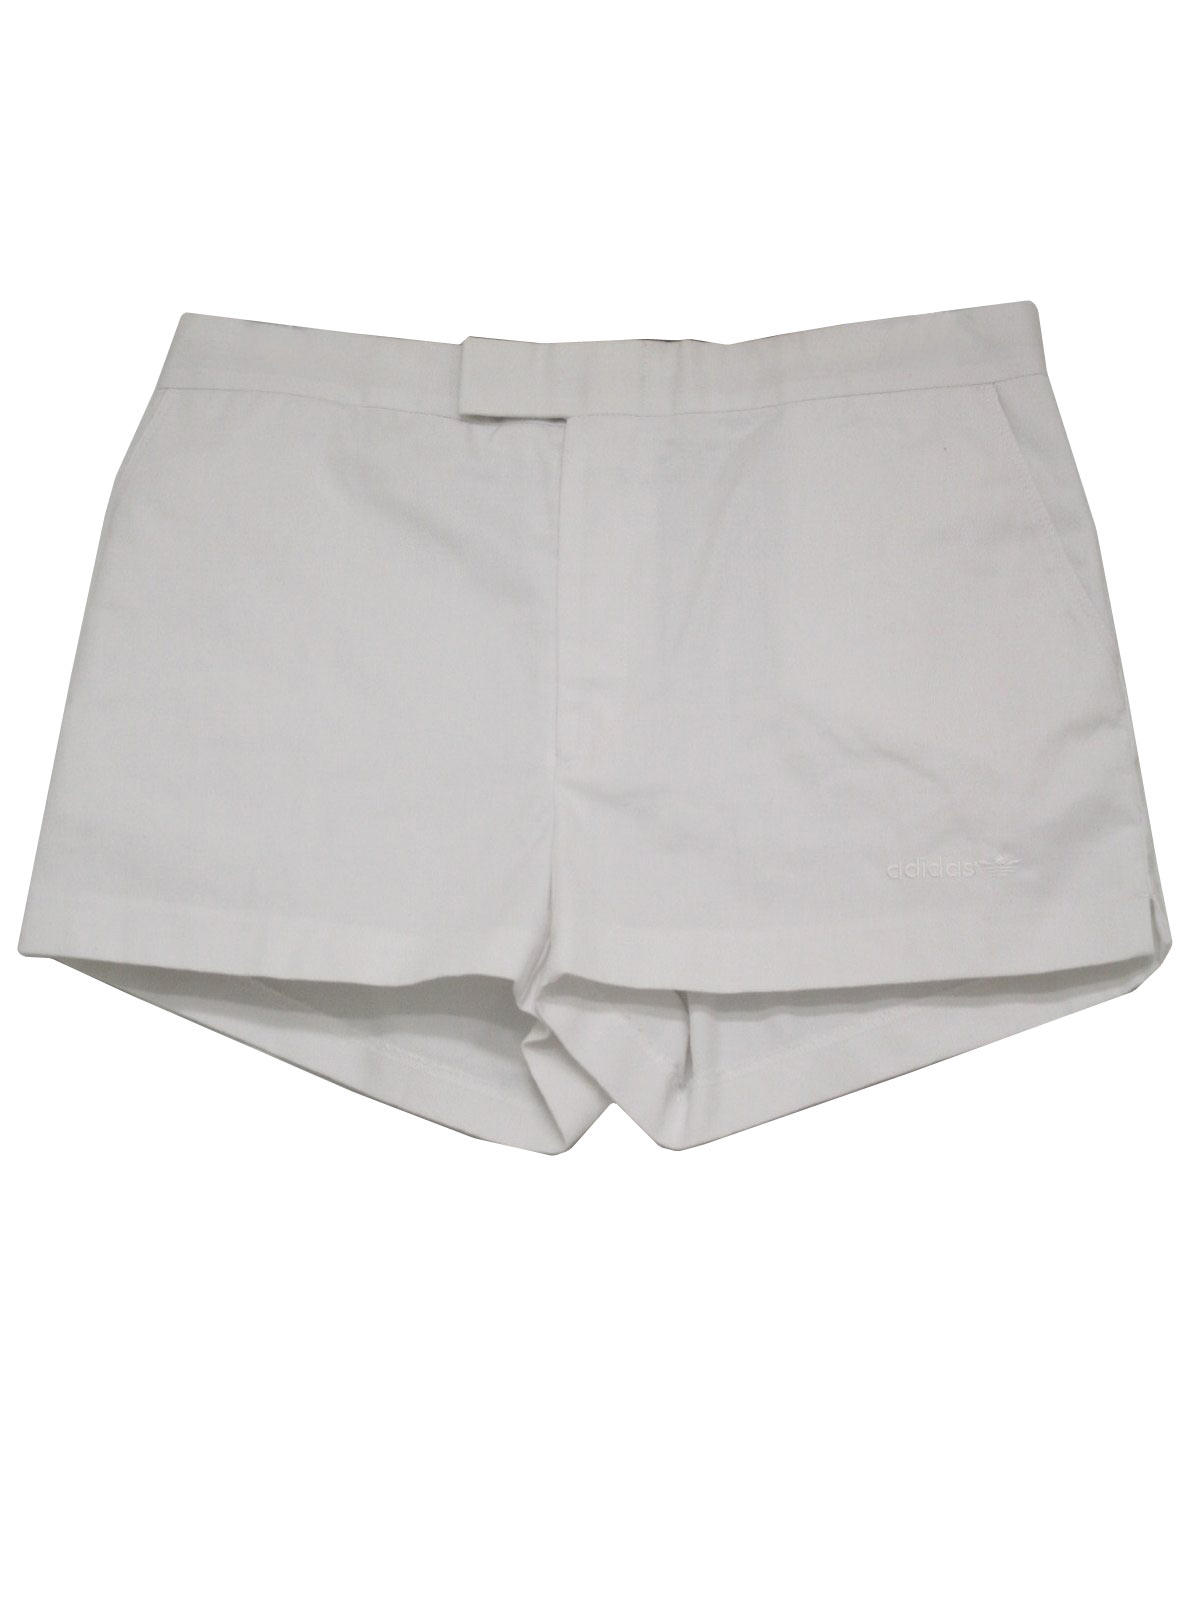 Vintage 1980's Shorts: 80s -Adidas- Mens white polyester cotton twill ...